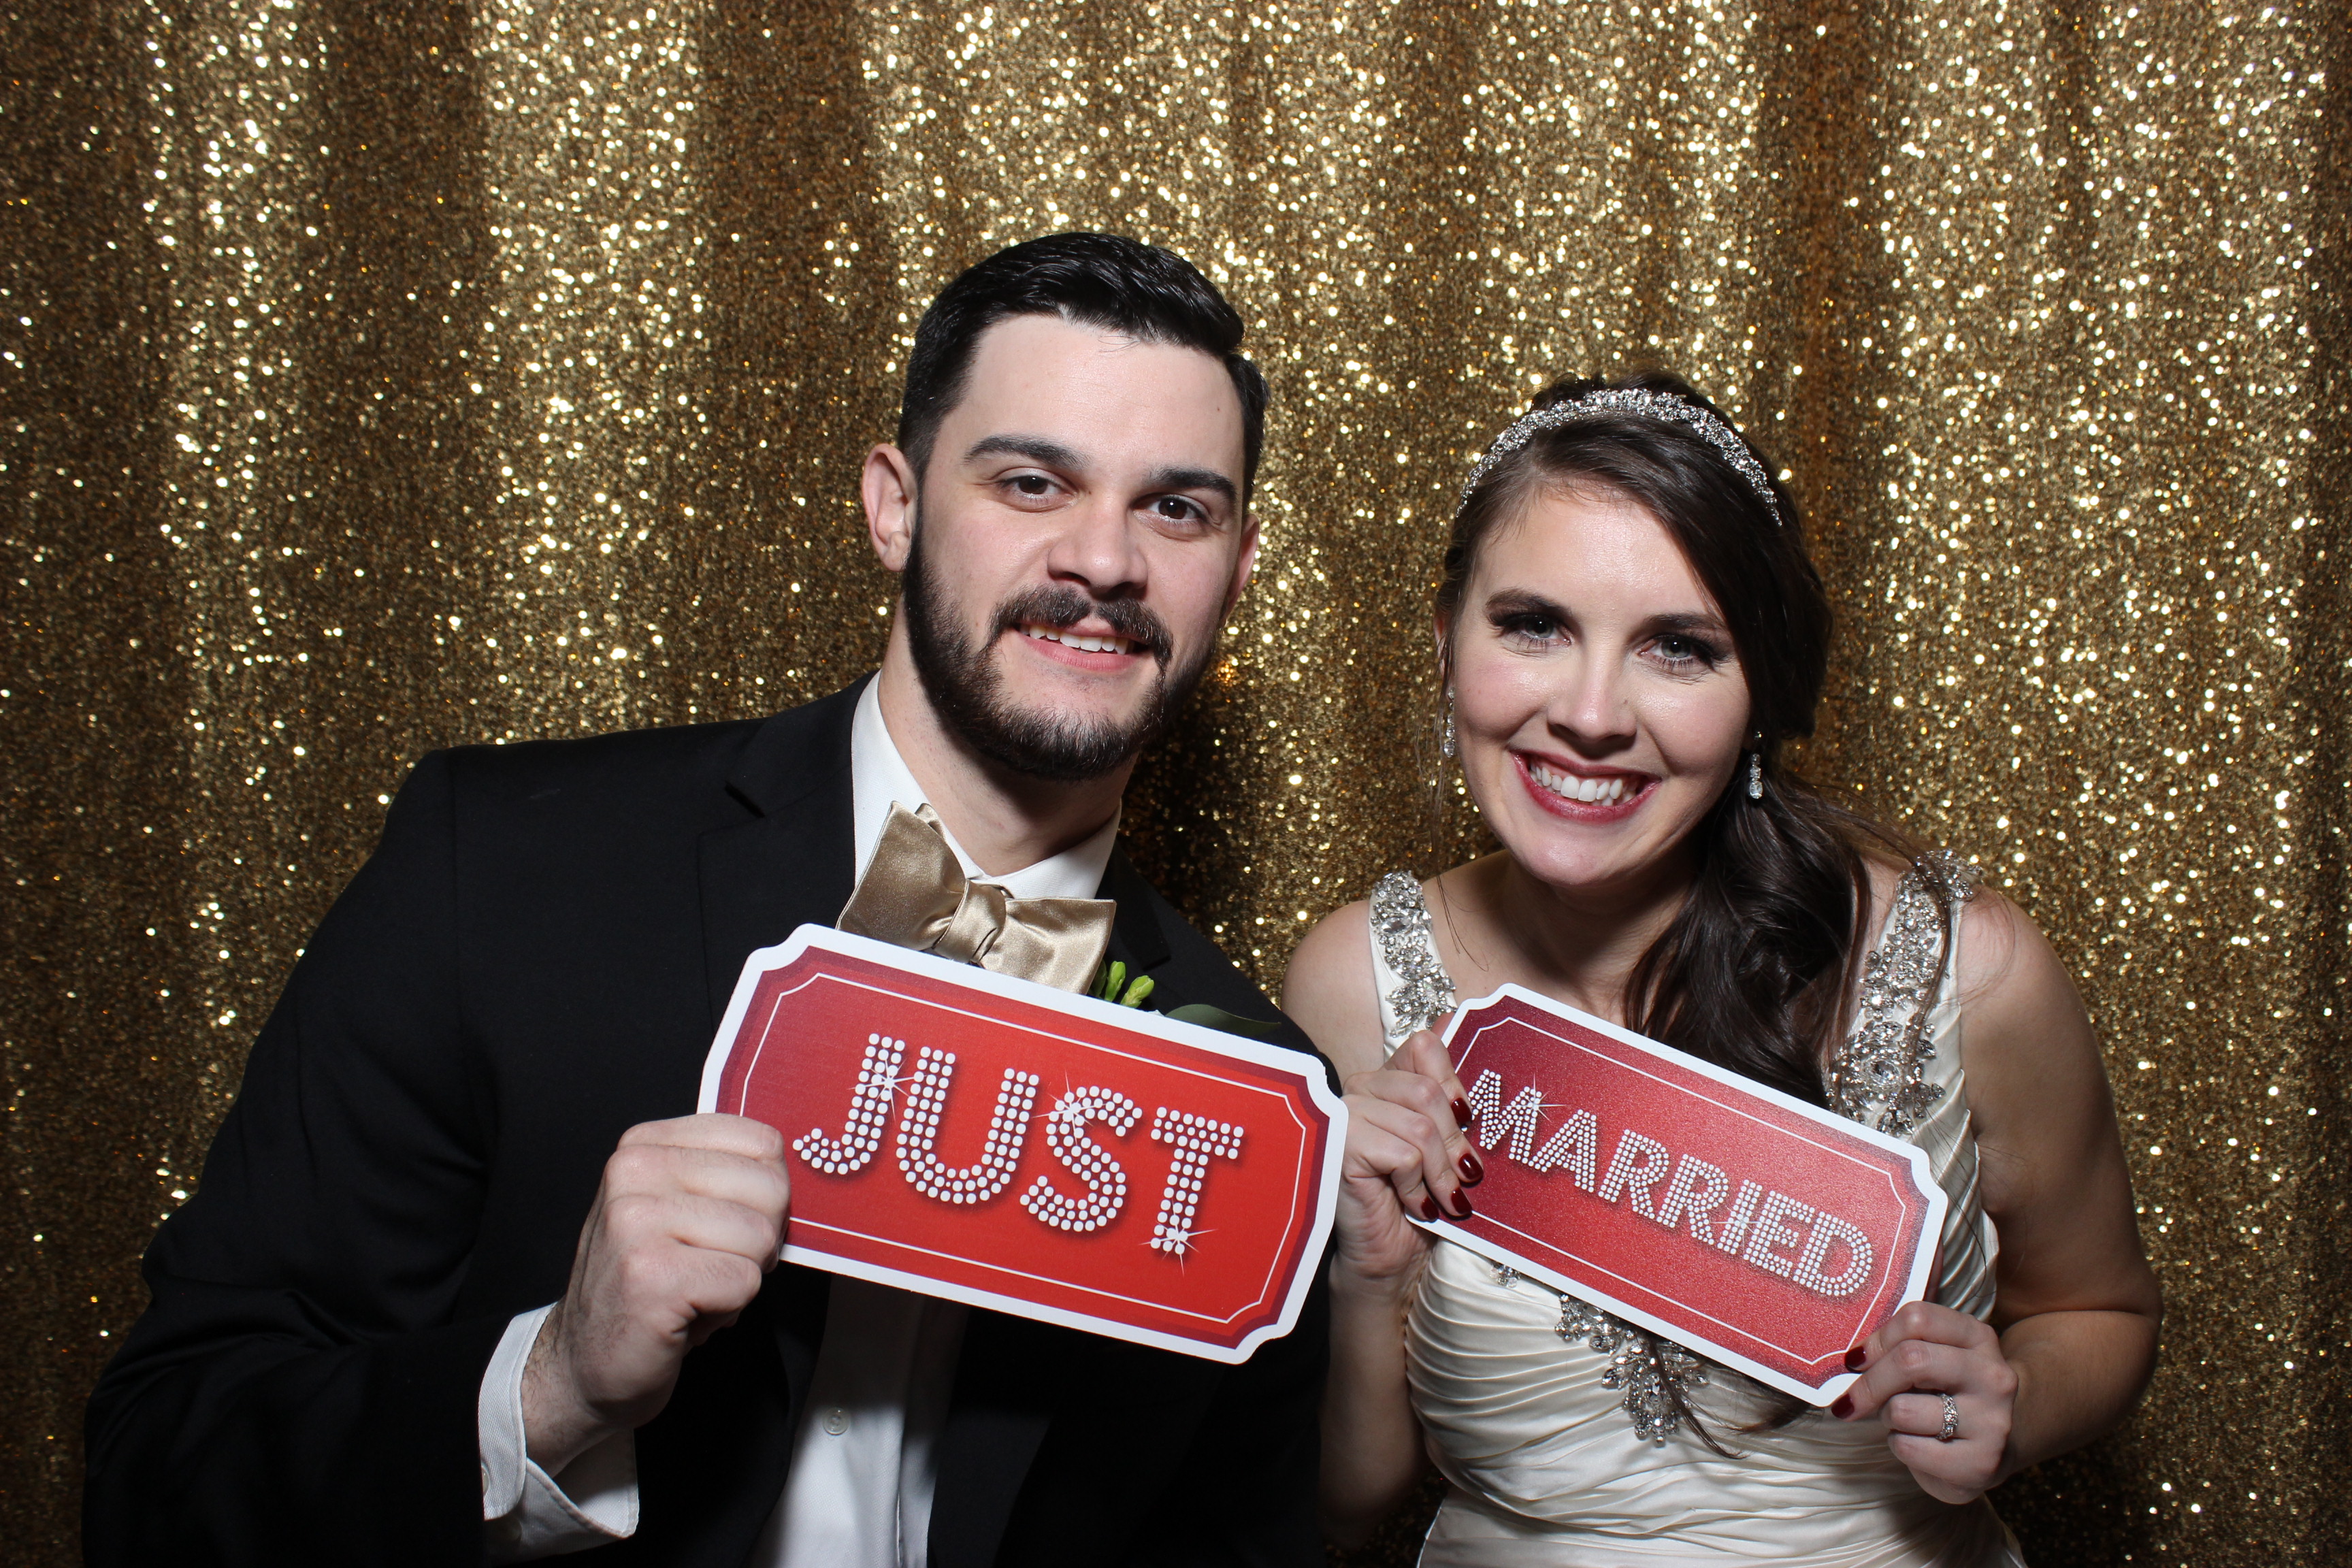 Amazing New Year’s Eve Wedding and Photo Booth Fun